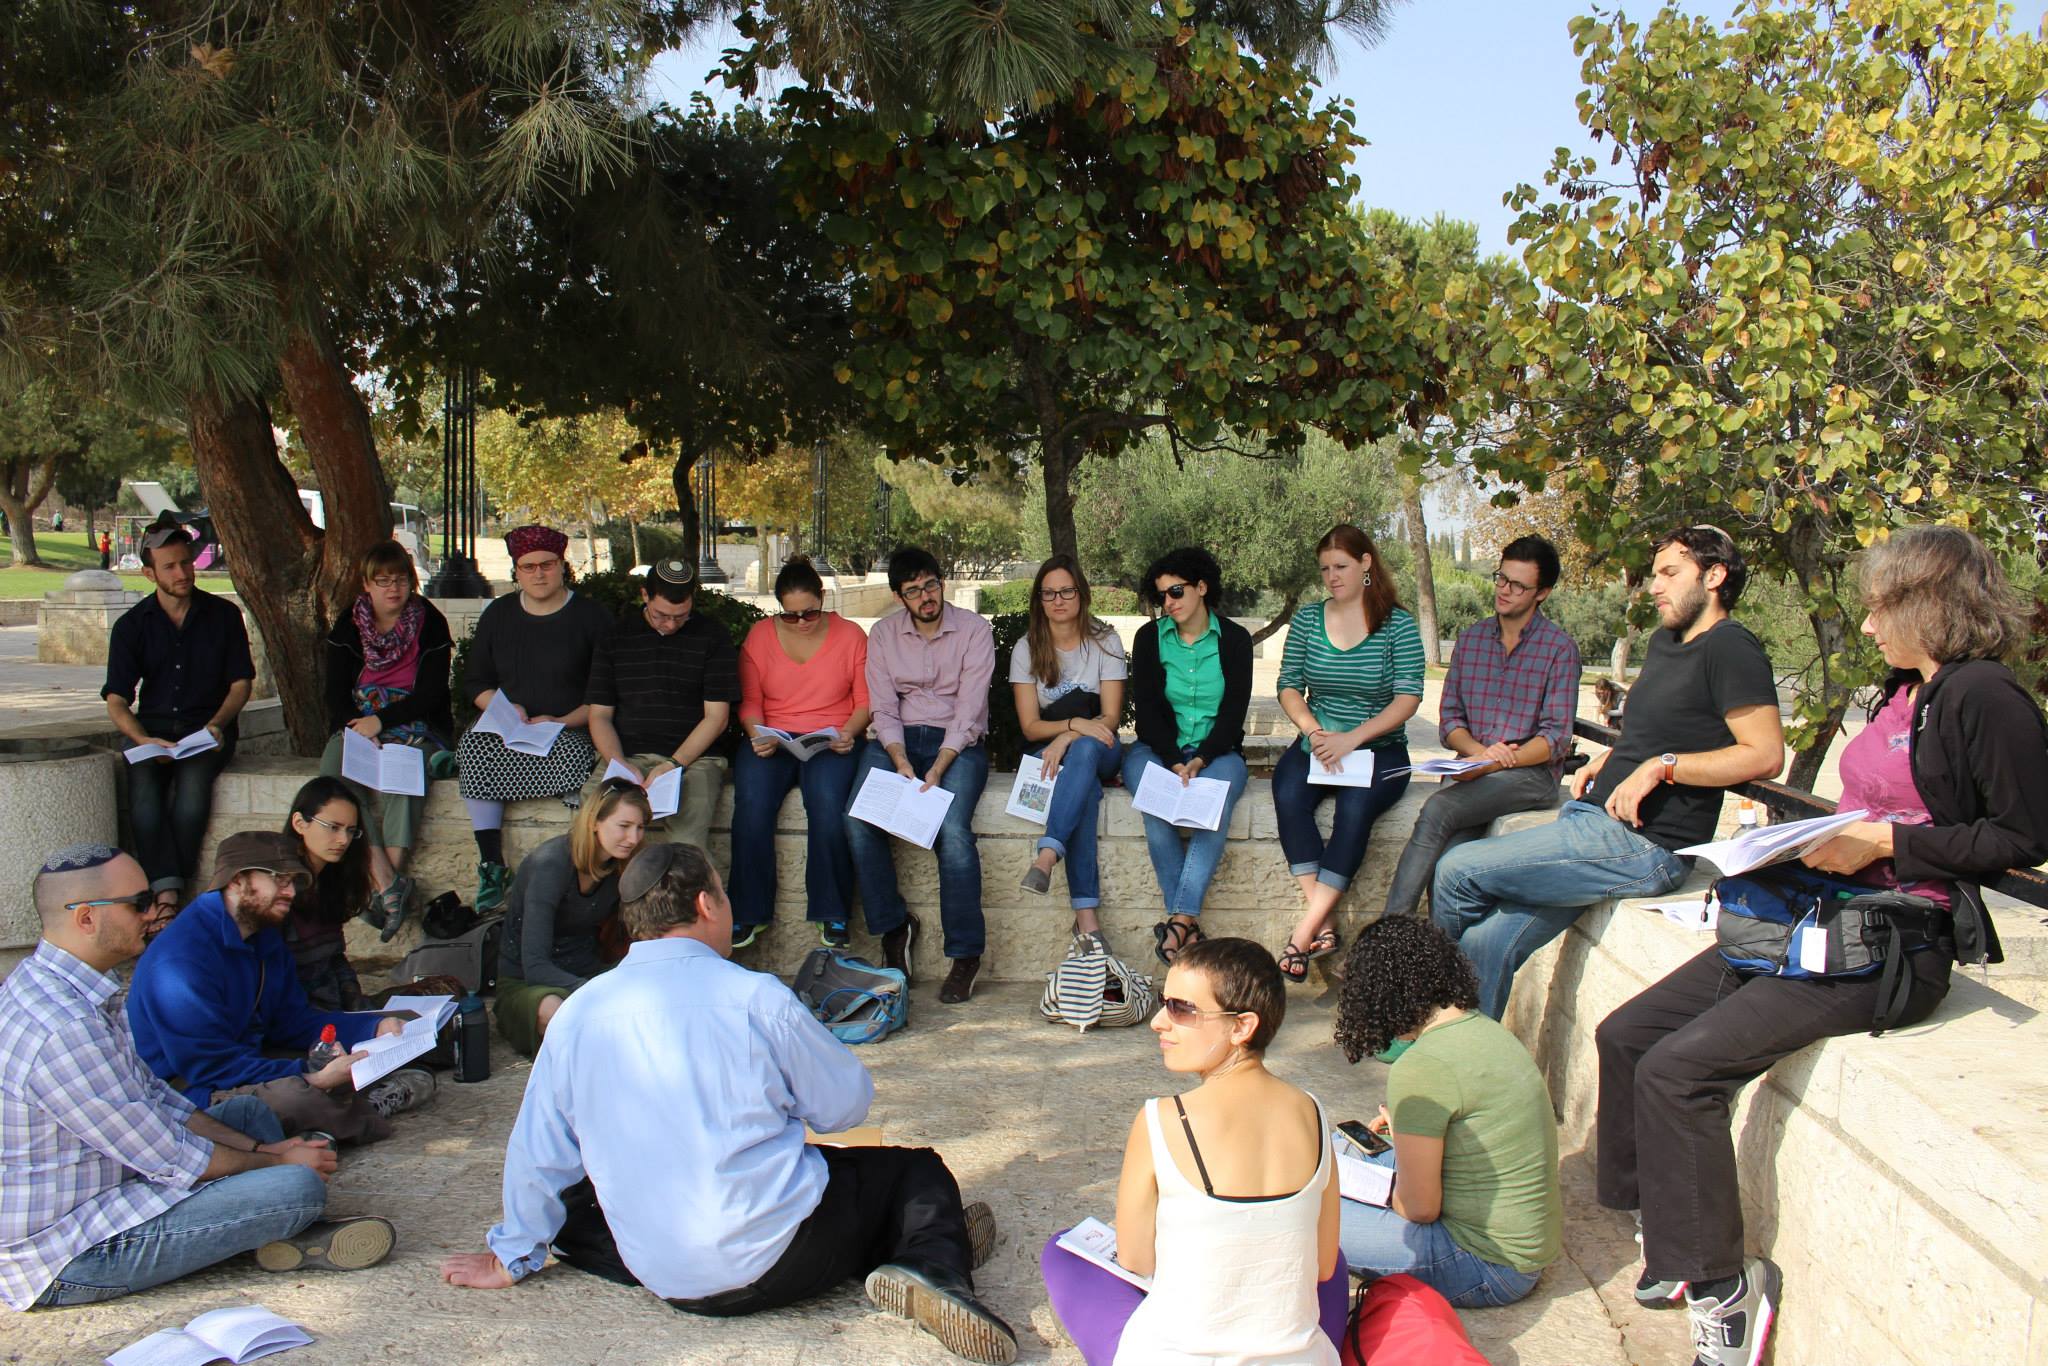 What Does Israel Mean to You? Two Educators Share Their Vision of Israel Education